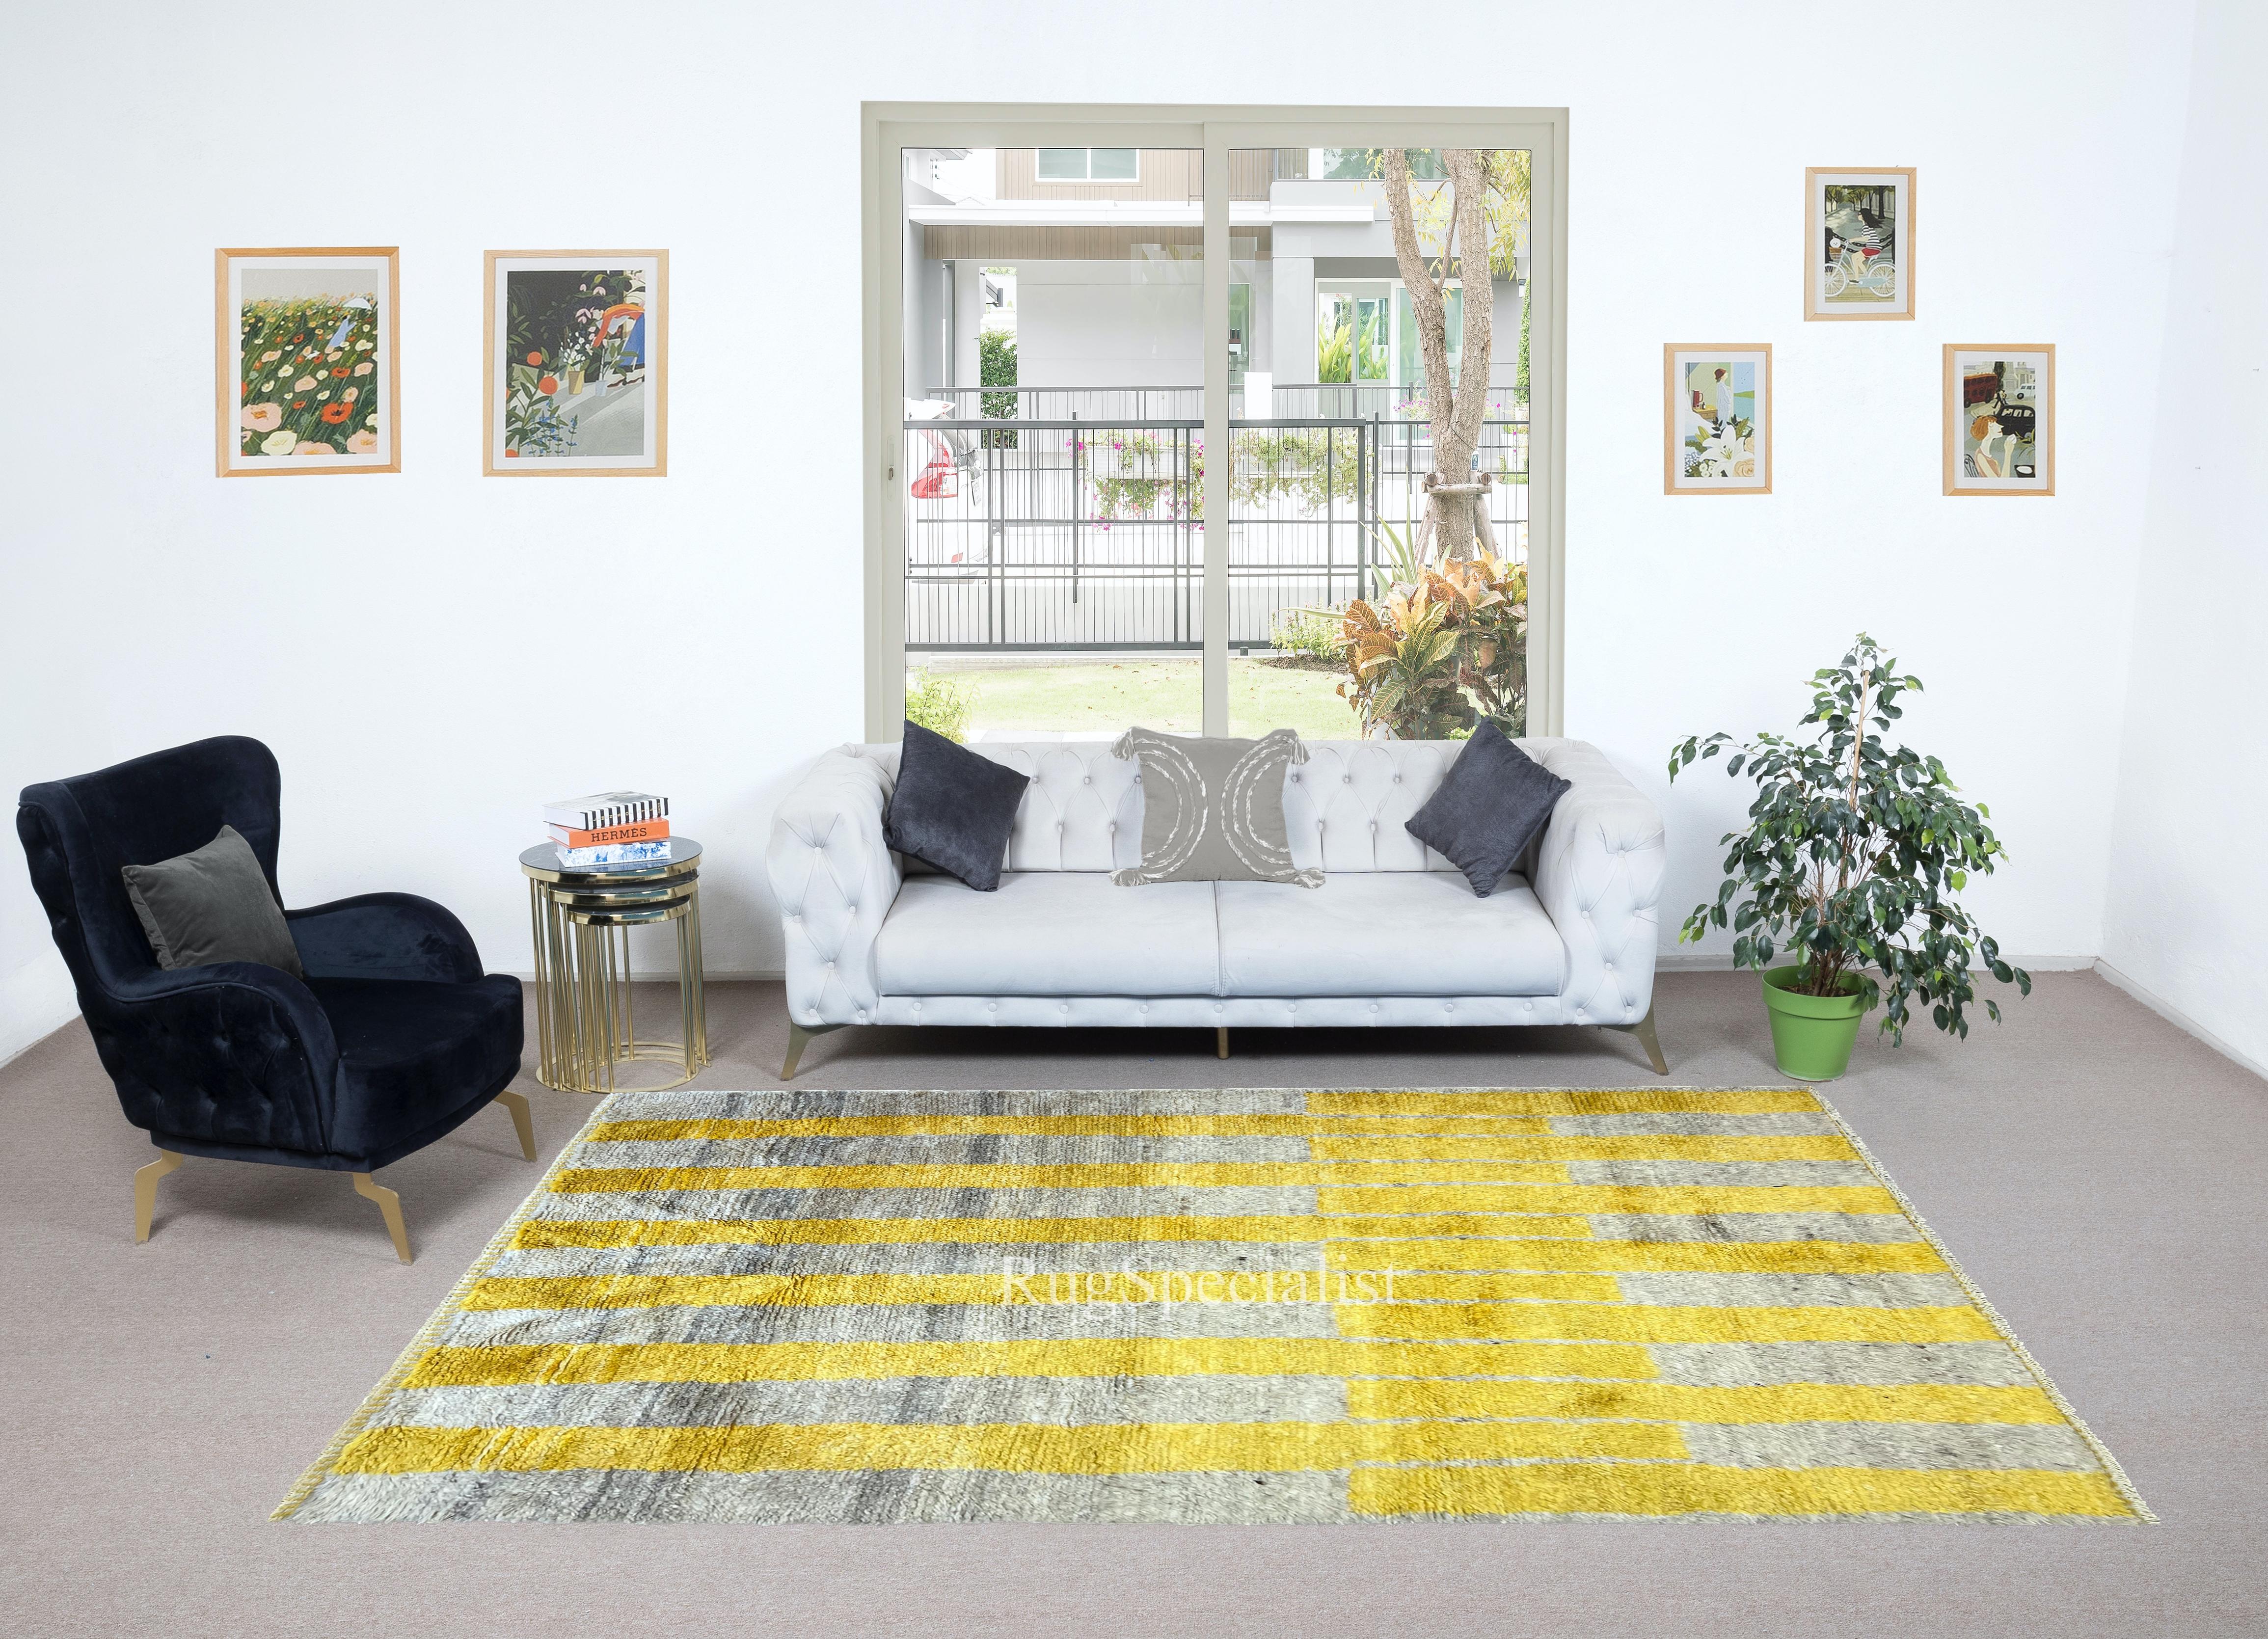 Elevate your living space with the exquisite charm of this new modern hand-knotted Moroccan berber beni ourain rug, crafted with precision and care from 100% wool. Combining the allure of Moroccan design with contemporary sensibilities, this rug is